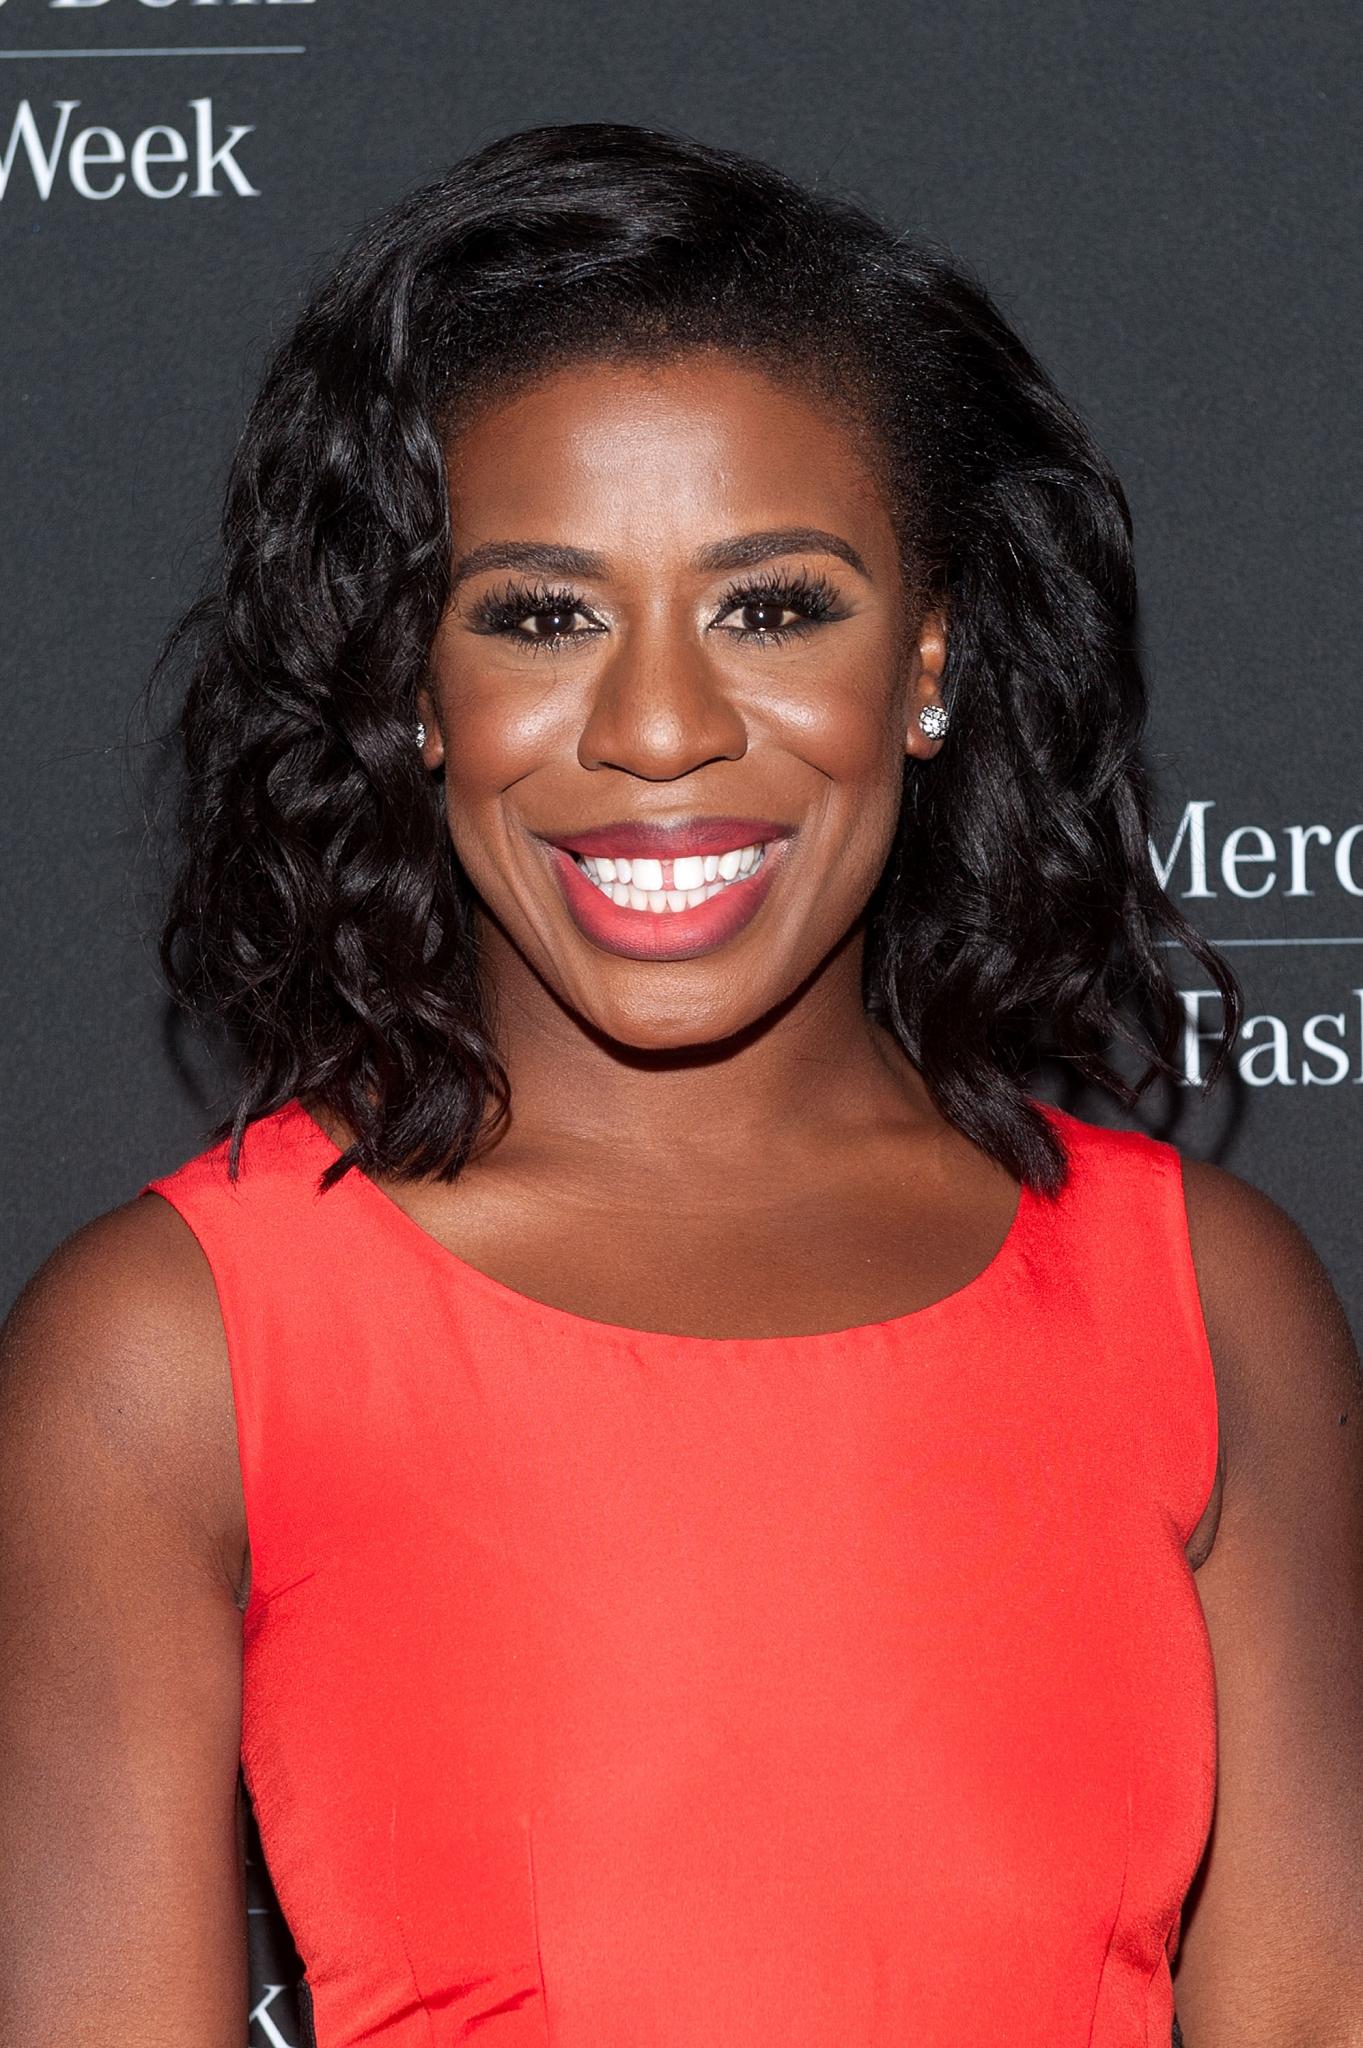 21 Funny Women Who Need to Host 'SNL'